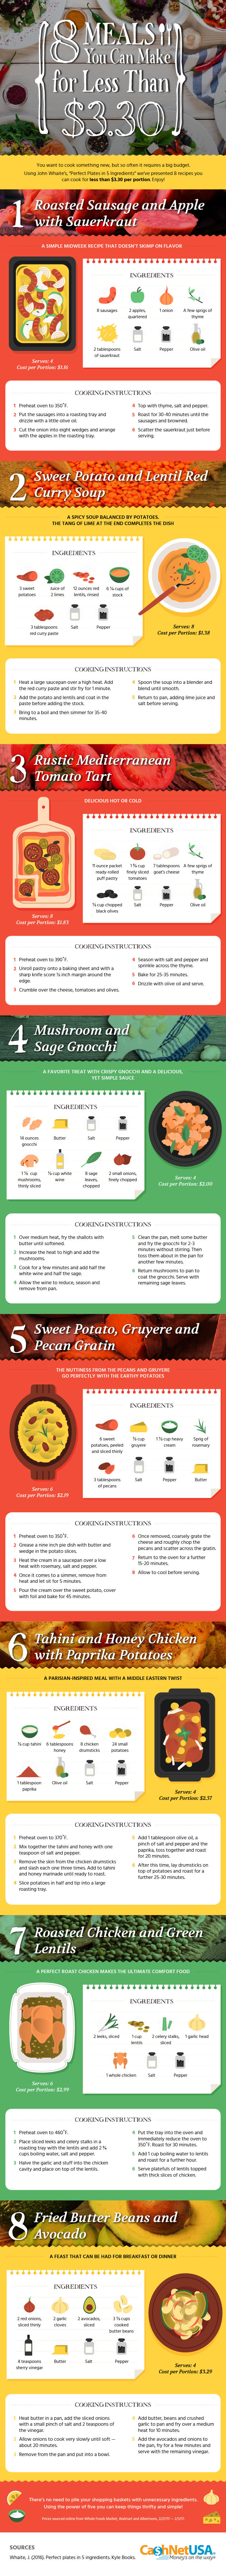 8 meals you can make for less than $3.30 Infographic